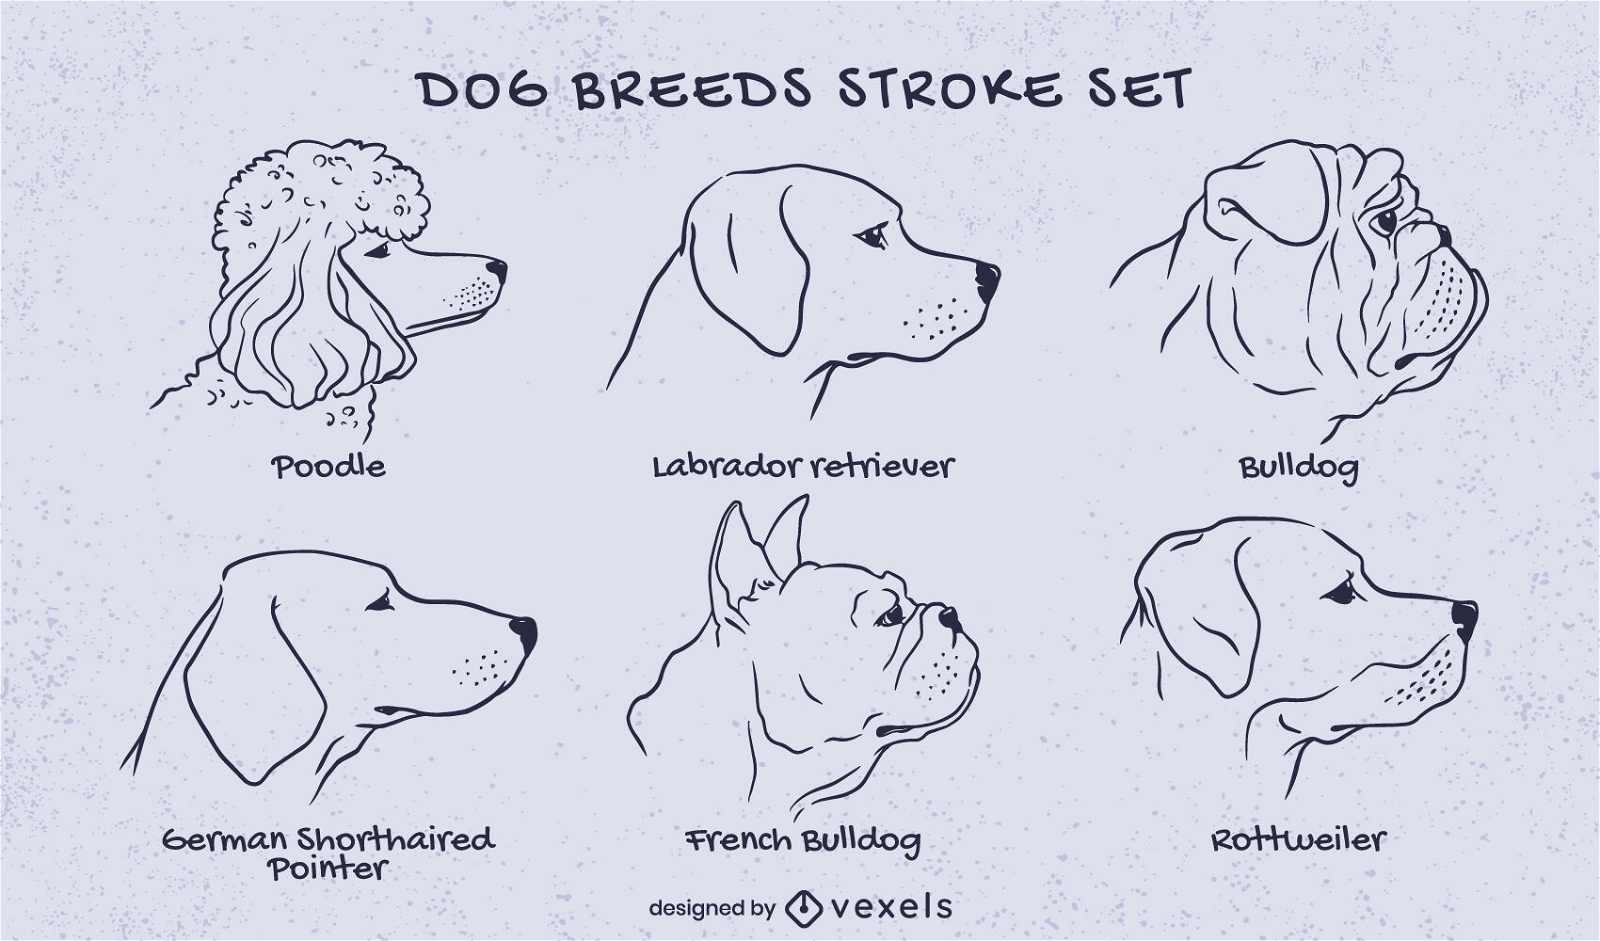 Dogs of different breeds stroke set